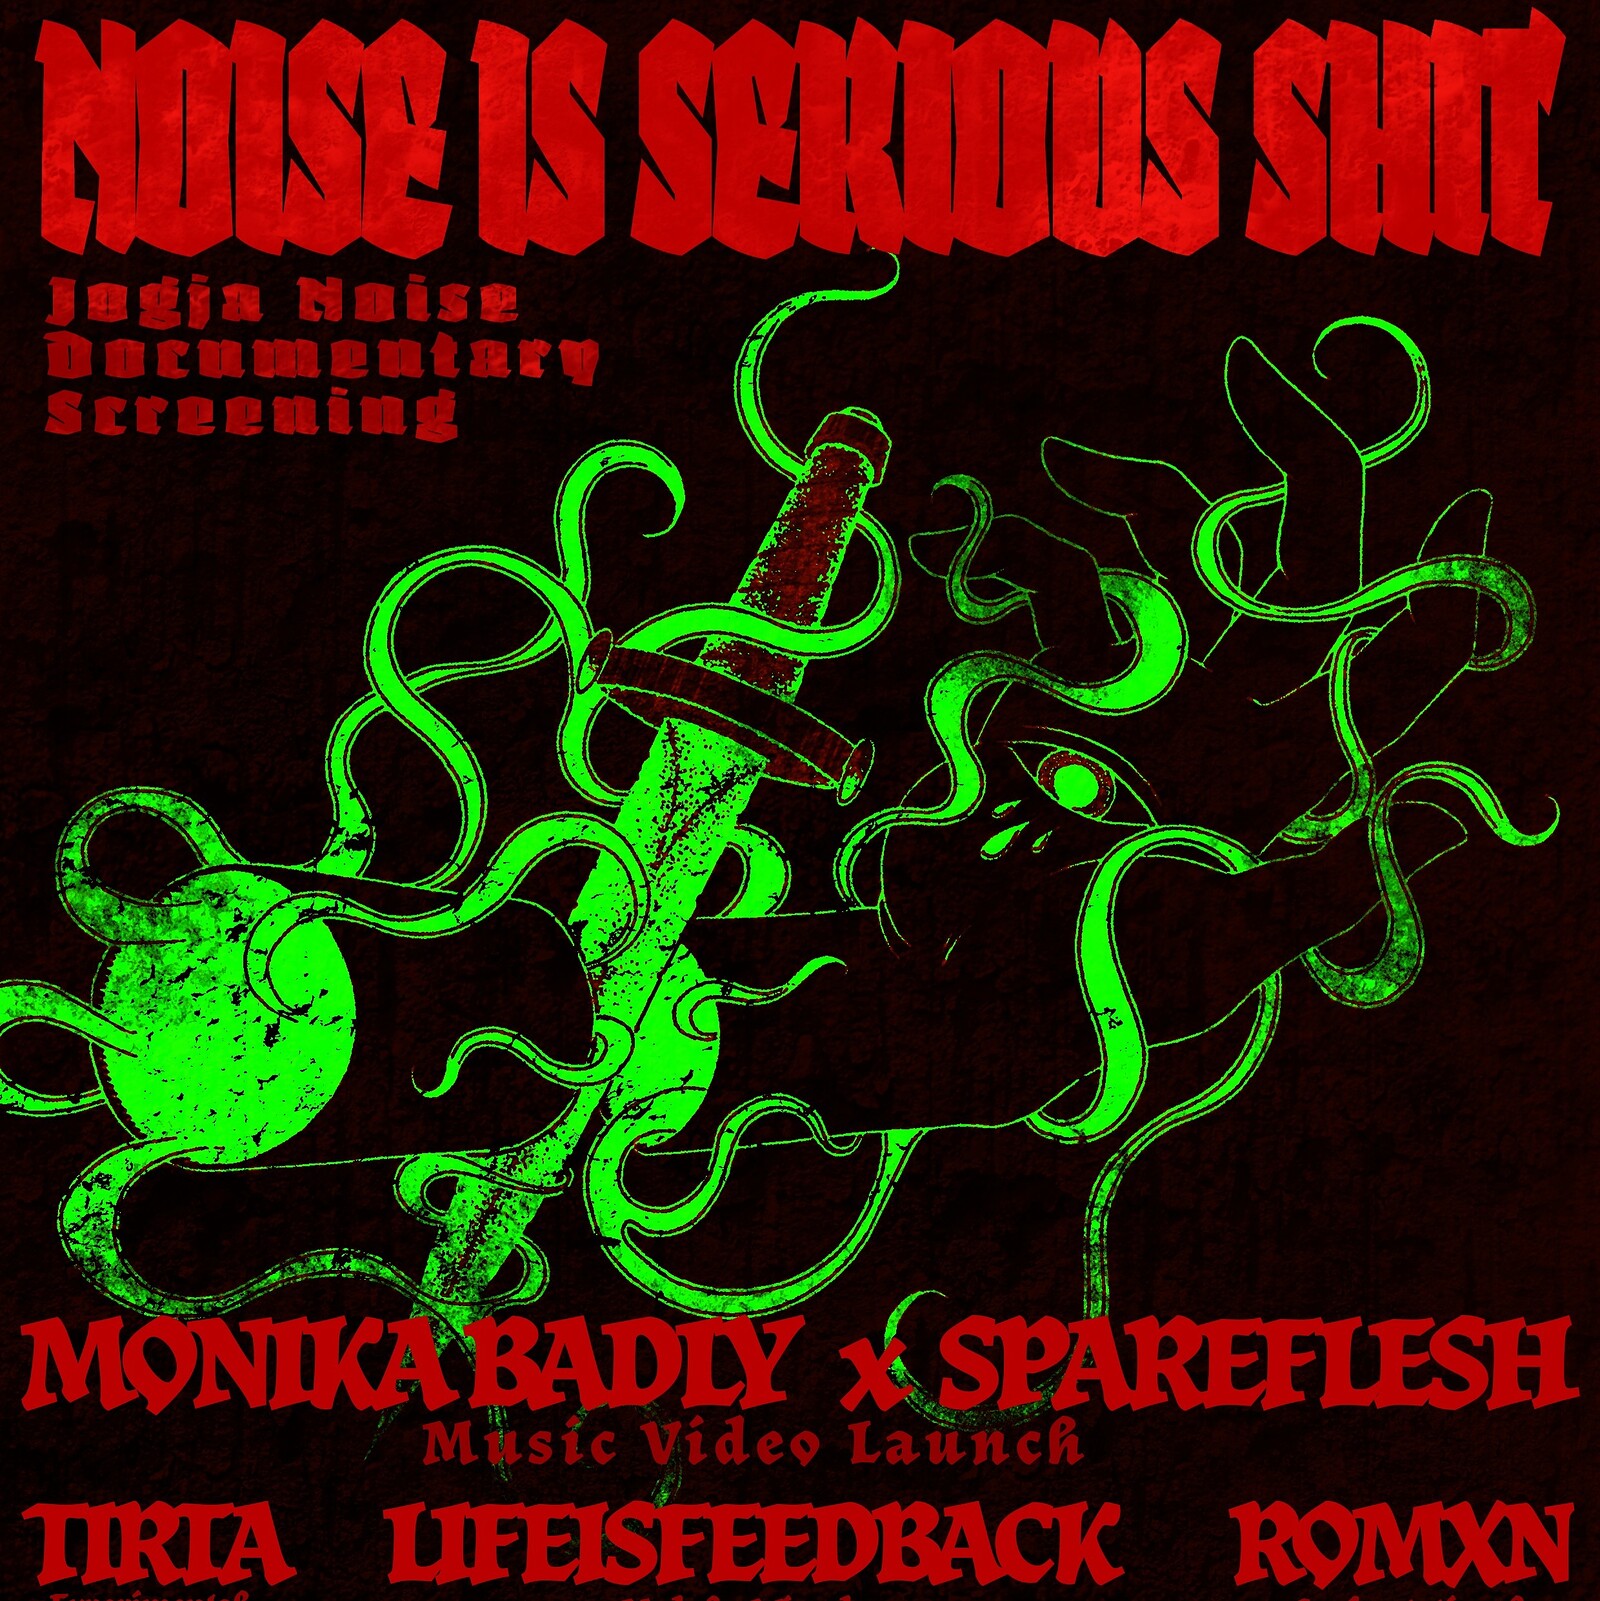 Noise Is Serious Shit at The Cube